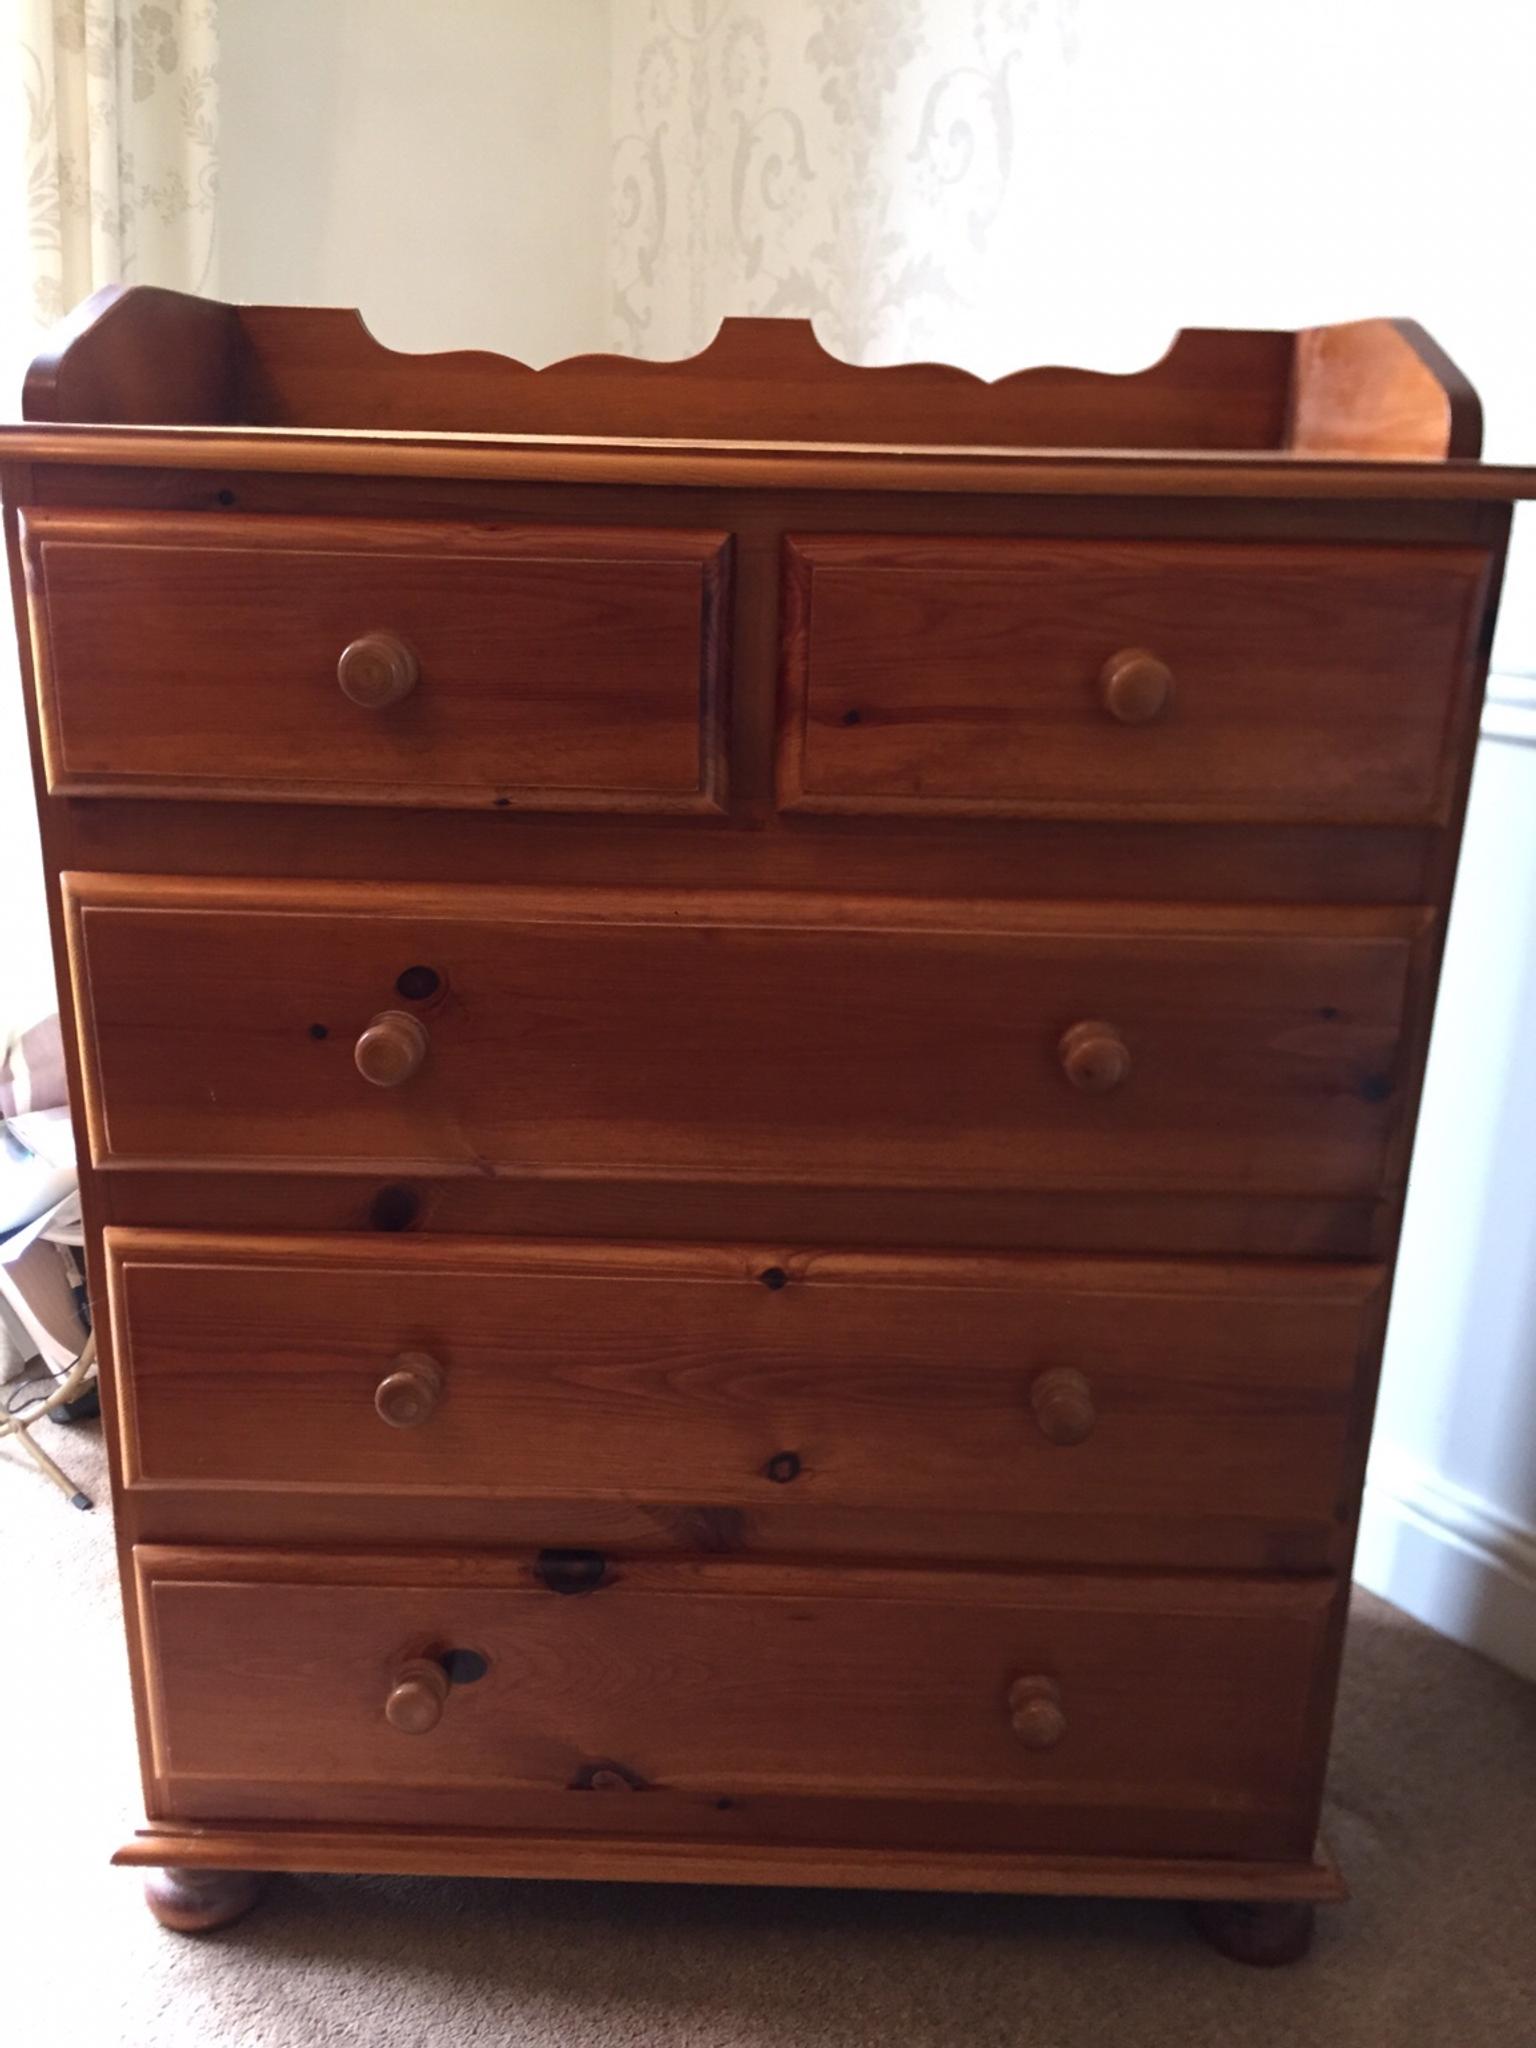 Pine Chest Of Drawers In Ws3 Walsall For 25 00 For Sale Shpock